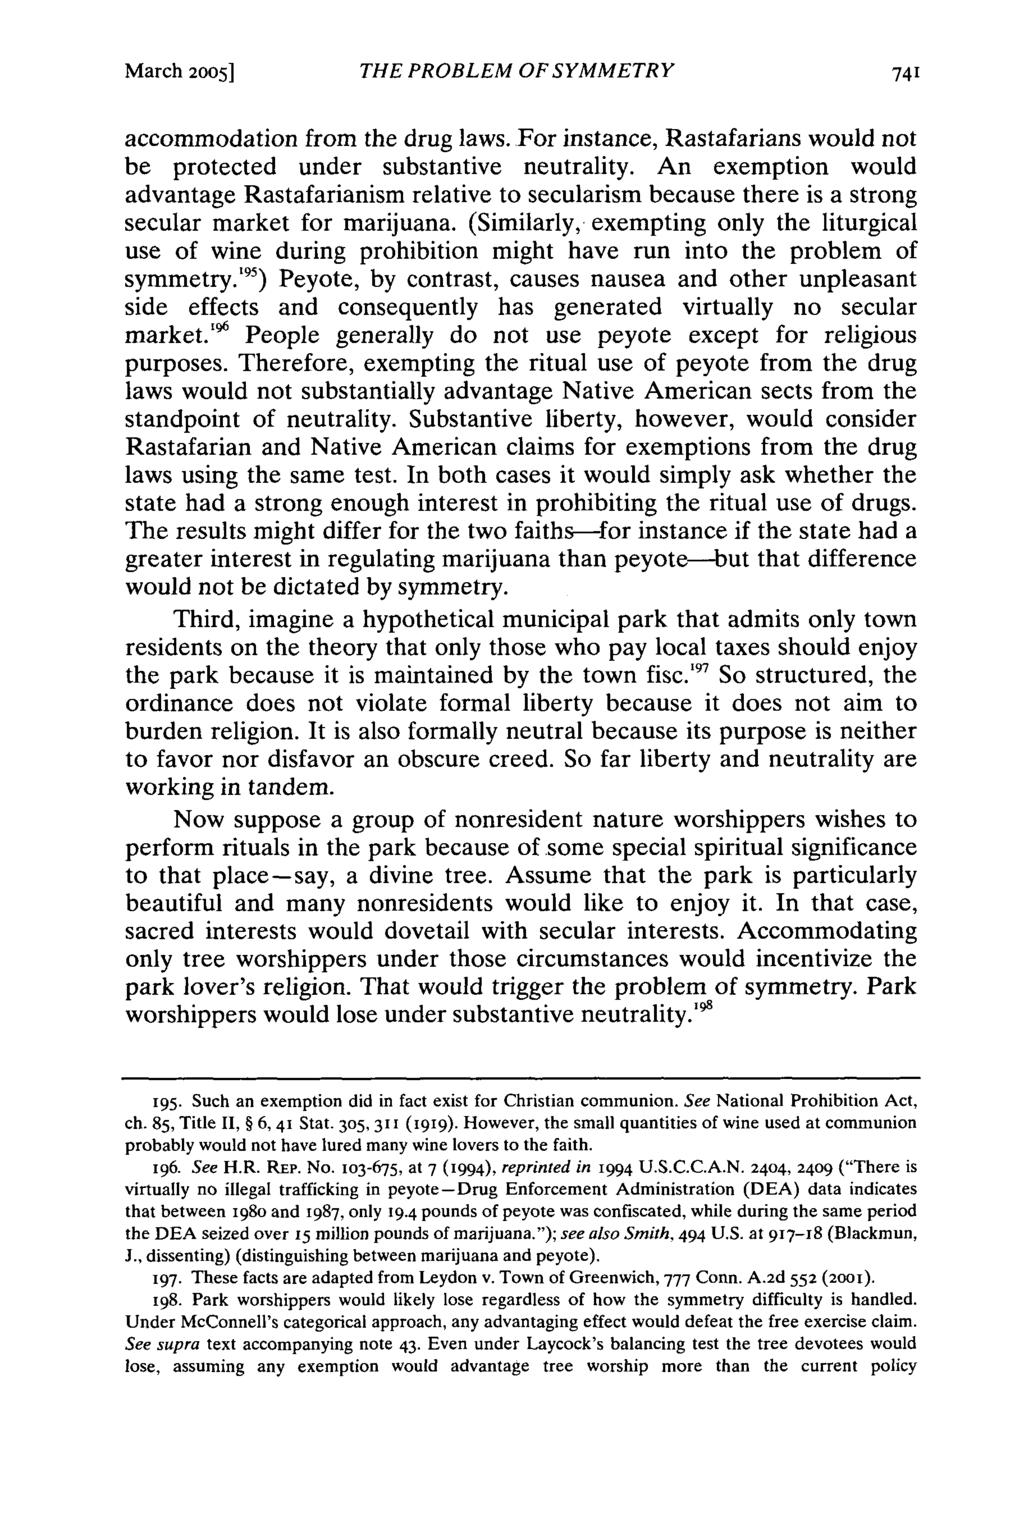 March 2005] THE PROBLEM OF SYMMETRY accommodation from the drug laws. For instance, Rastafarians would not be protected under substantive neutrality.